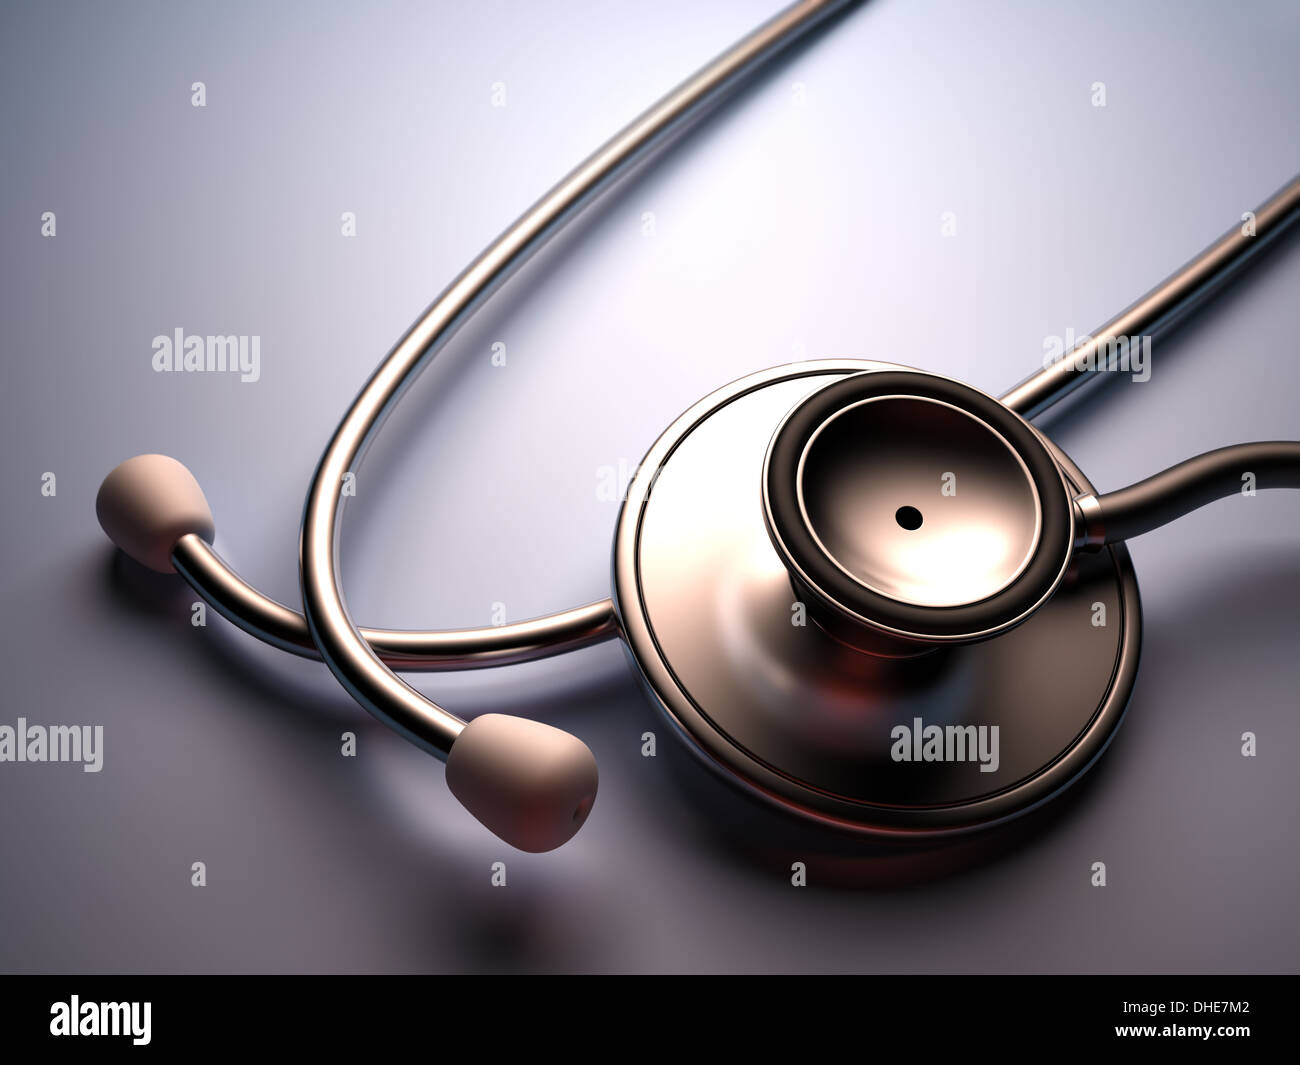 Stethoscope on a metal table. Stock Photo